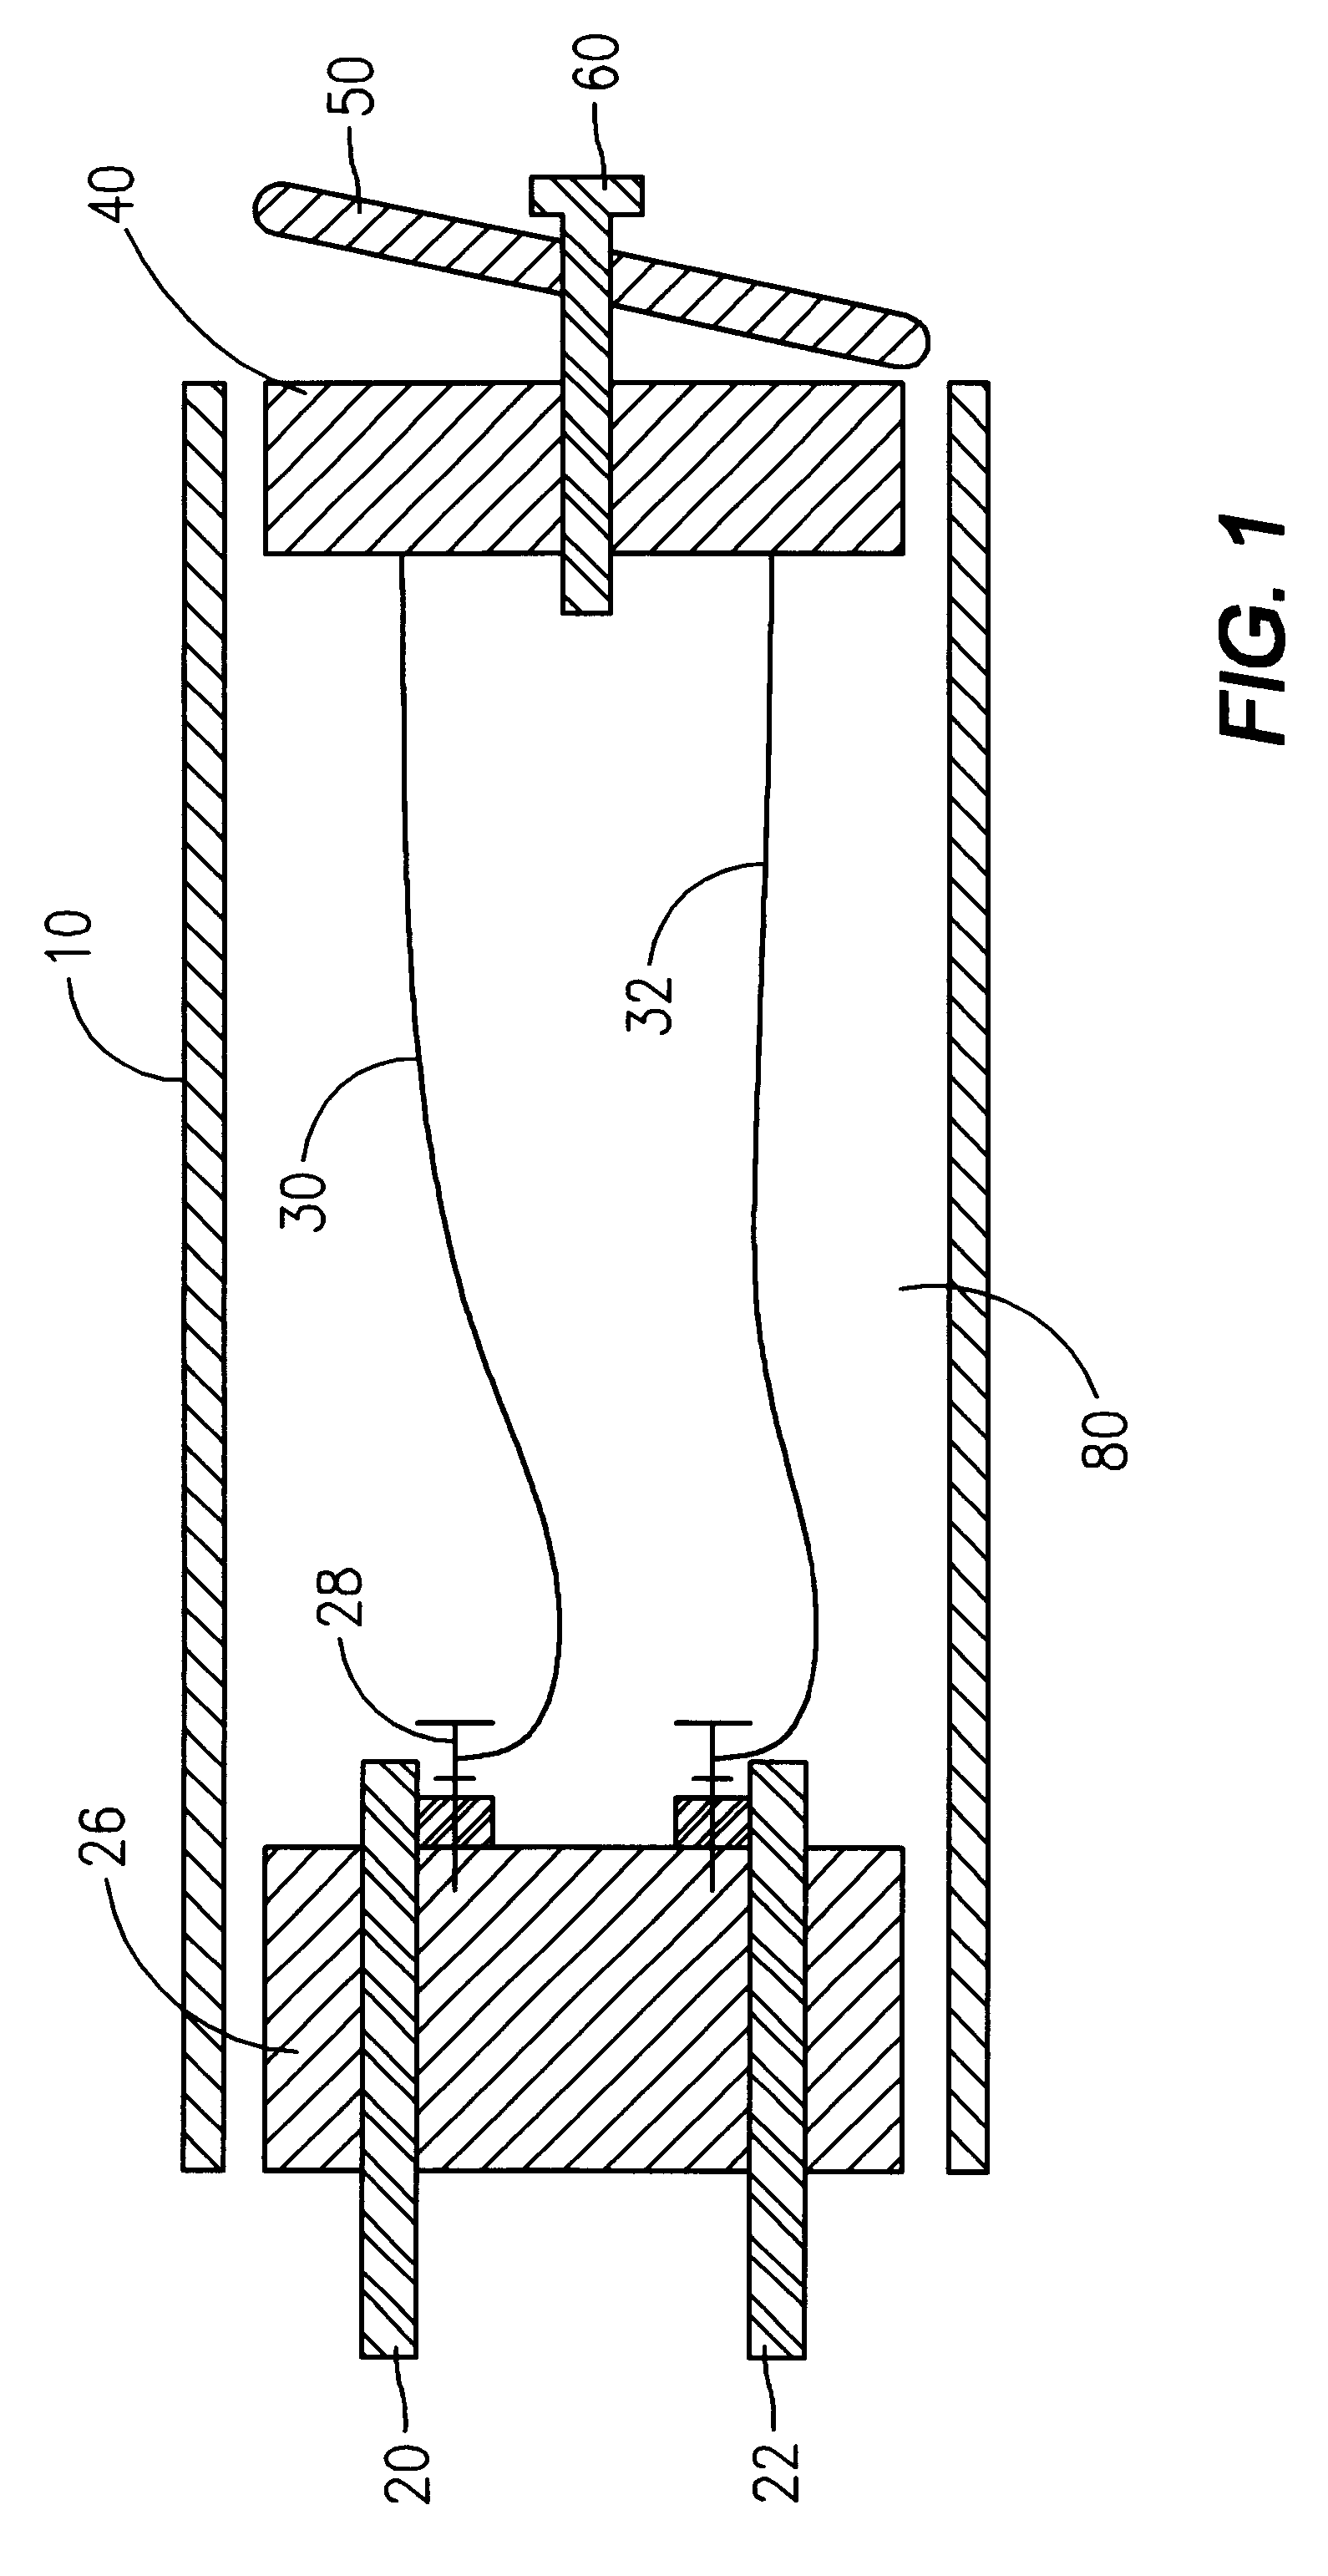 Apparatus for detecting a completed electrical circuit and testing an electrical output receptacle